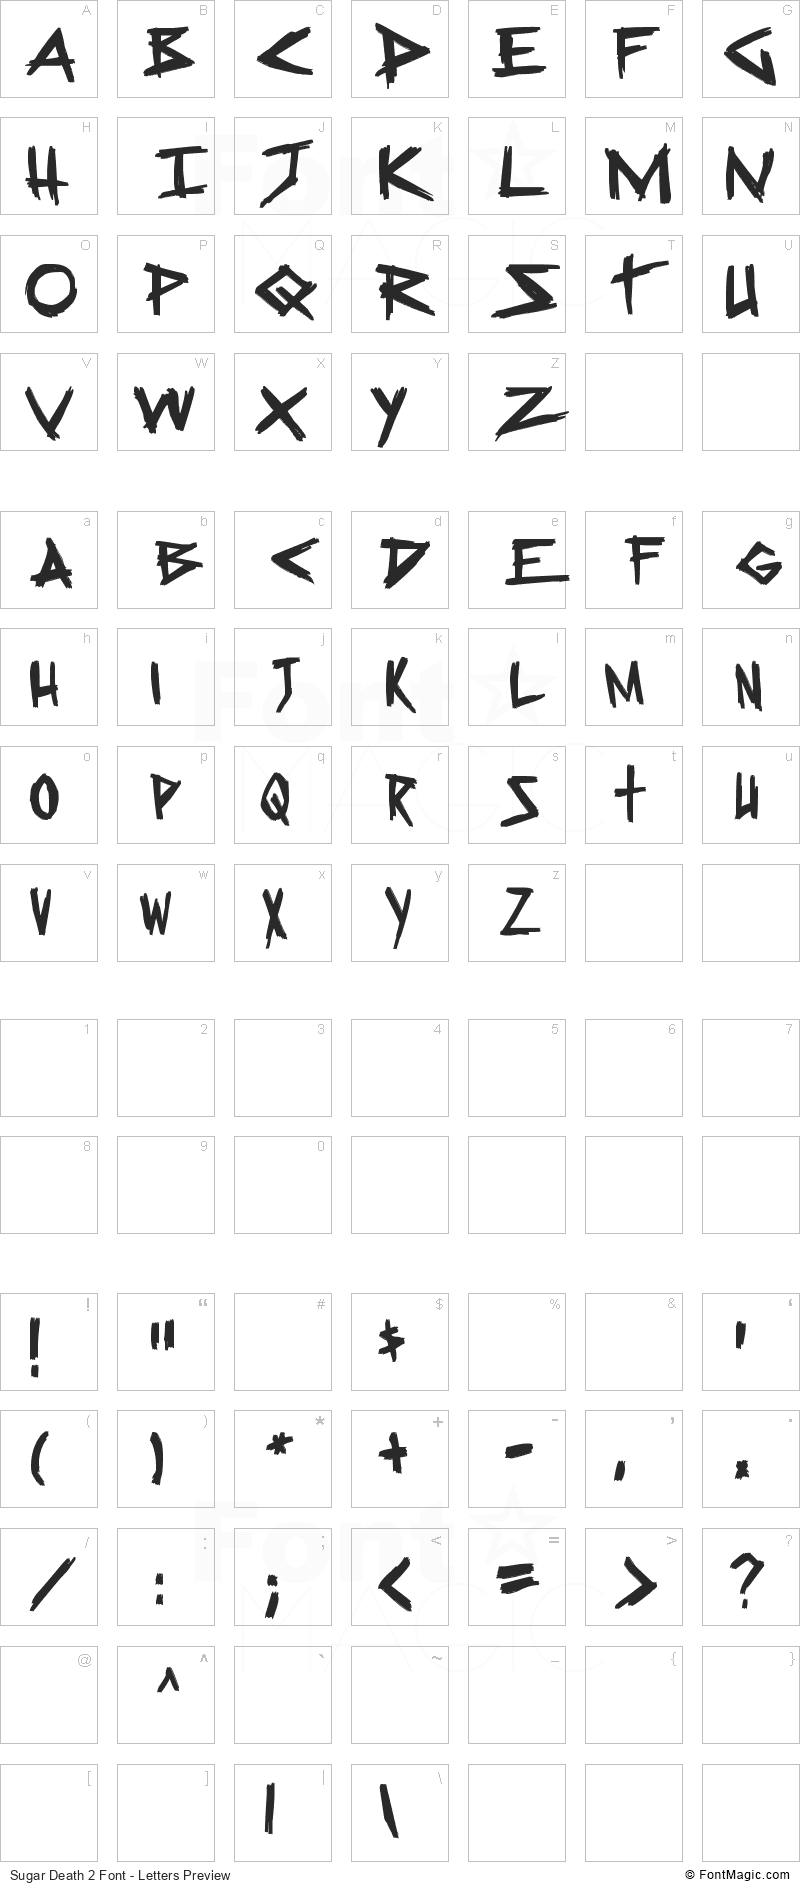 Sugar Death 2 Font - All Latters Preview Chart